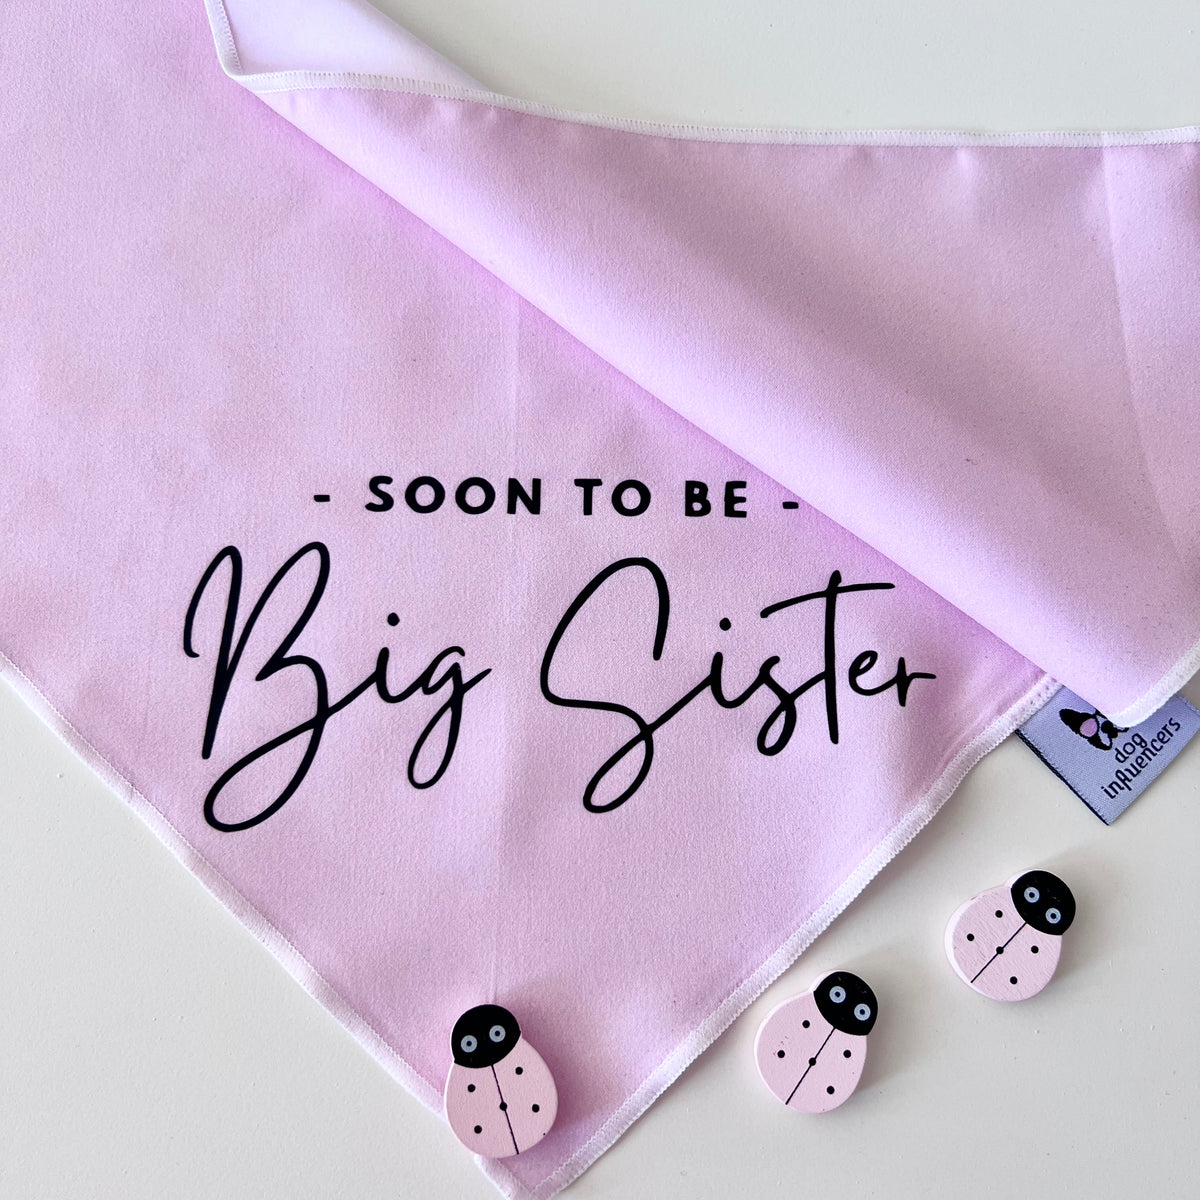 Dog Bandana - " Soon to be - Big Sister" - Pregnancy Announcement - Baby Reveal